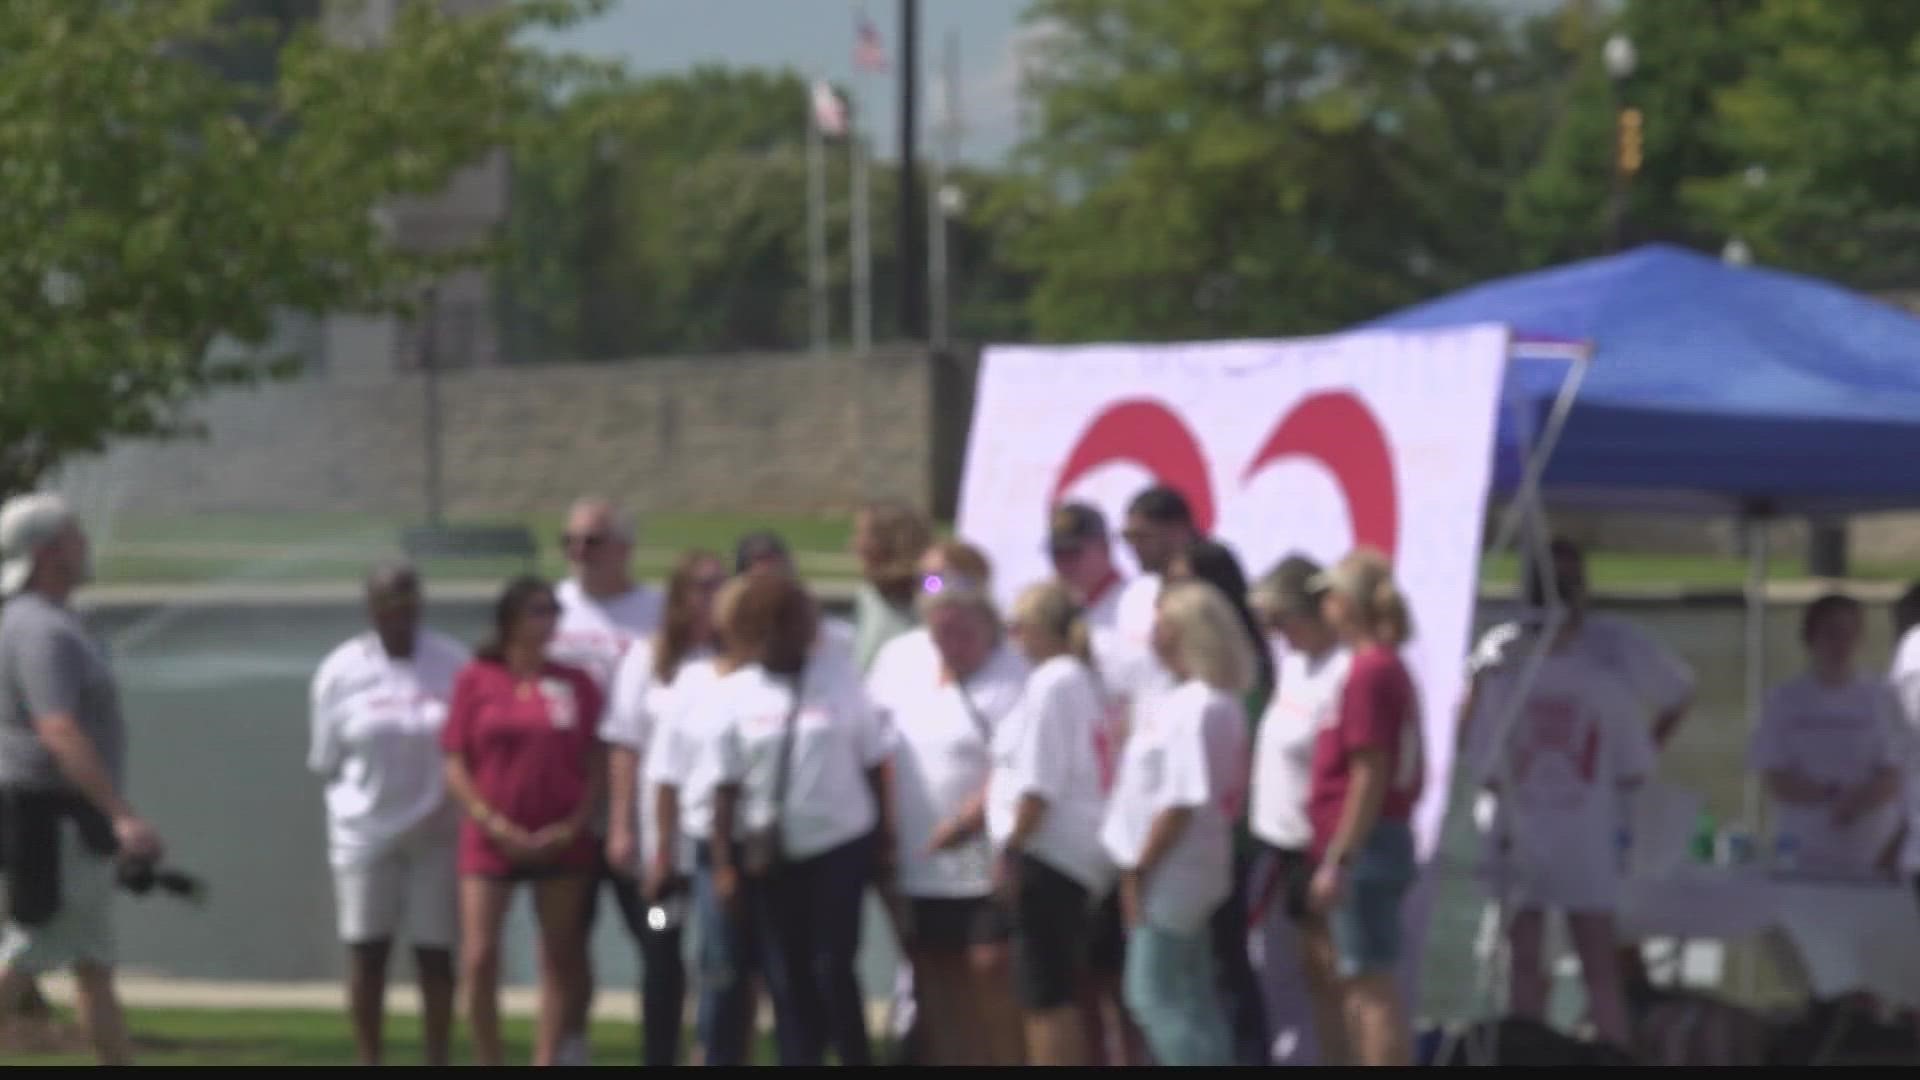 "Not One More Alabama" hosted the 5th "End Addiction Walk" to provide resources to those struggling, honor those lost, and connect with others.